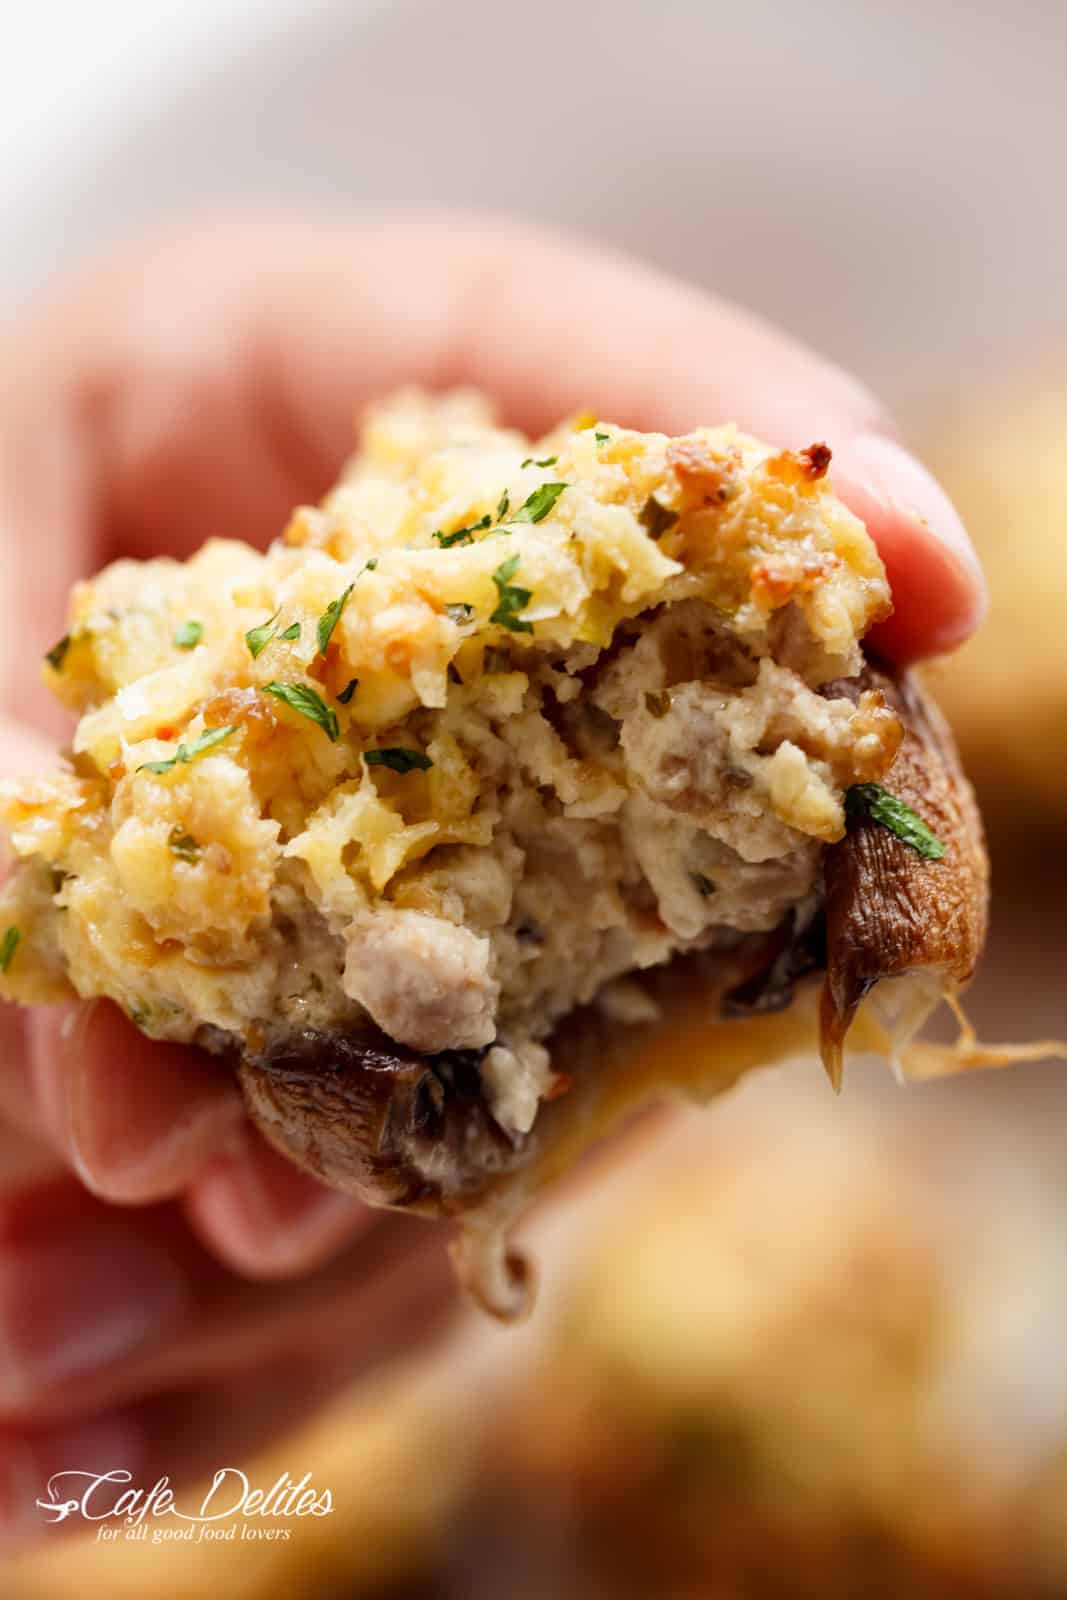 With every bite, you get the crunch on the outside thanks to broiling the parmesan, then the soft and creamy inside, PLUS the added juicy texture of that fleshy and meaty mushroom. | cafedelites.com